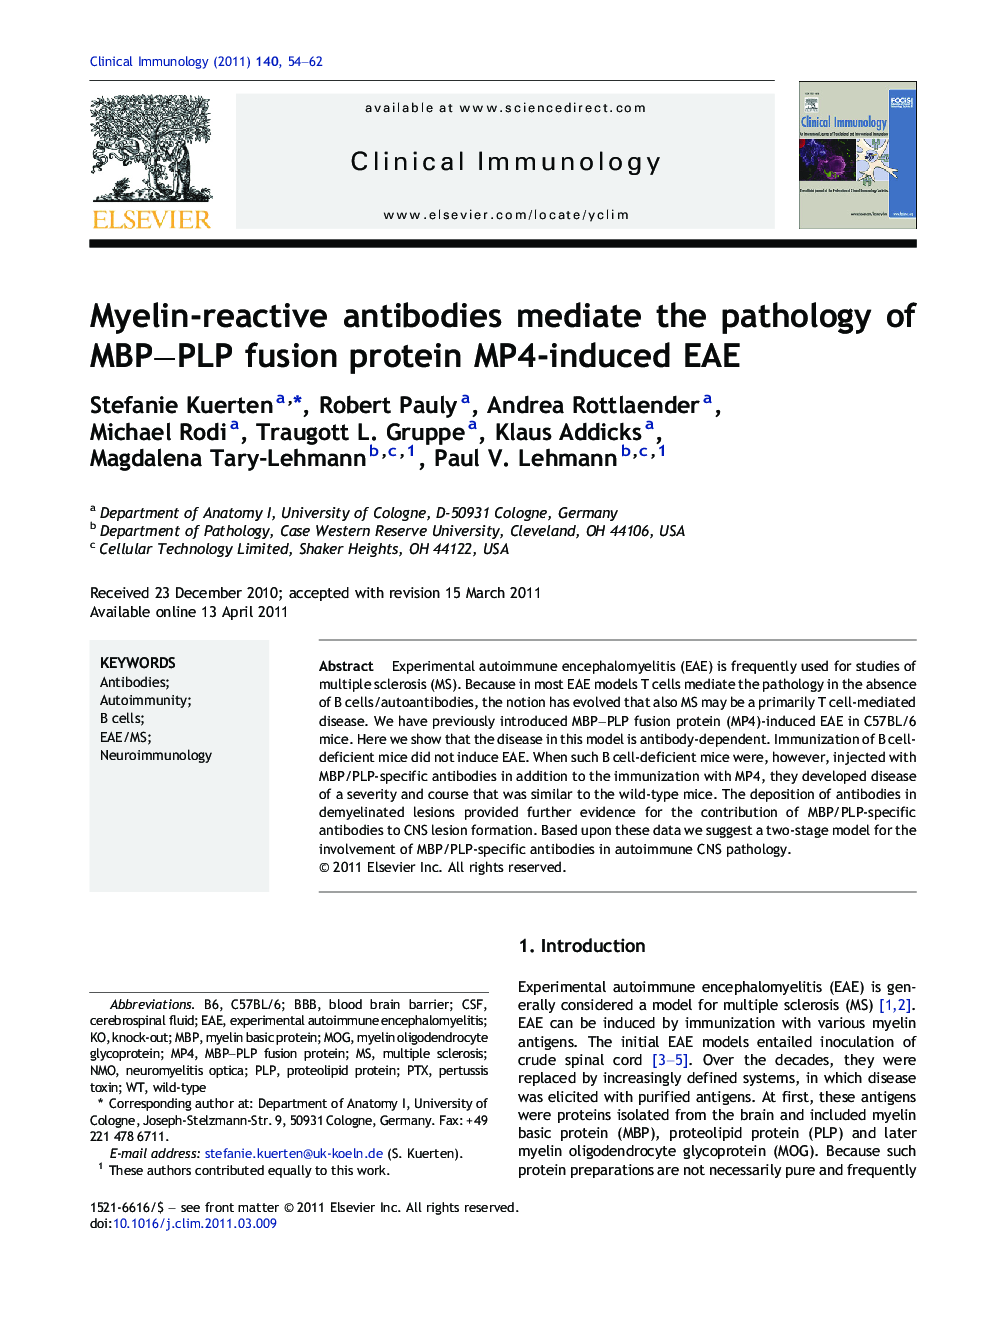 Myelin-reactive antibodies mediate the pathology of MBP–PLP fusion protein MP4-induced EAE